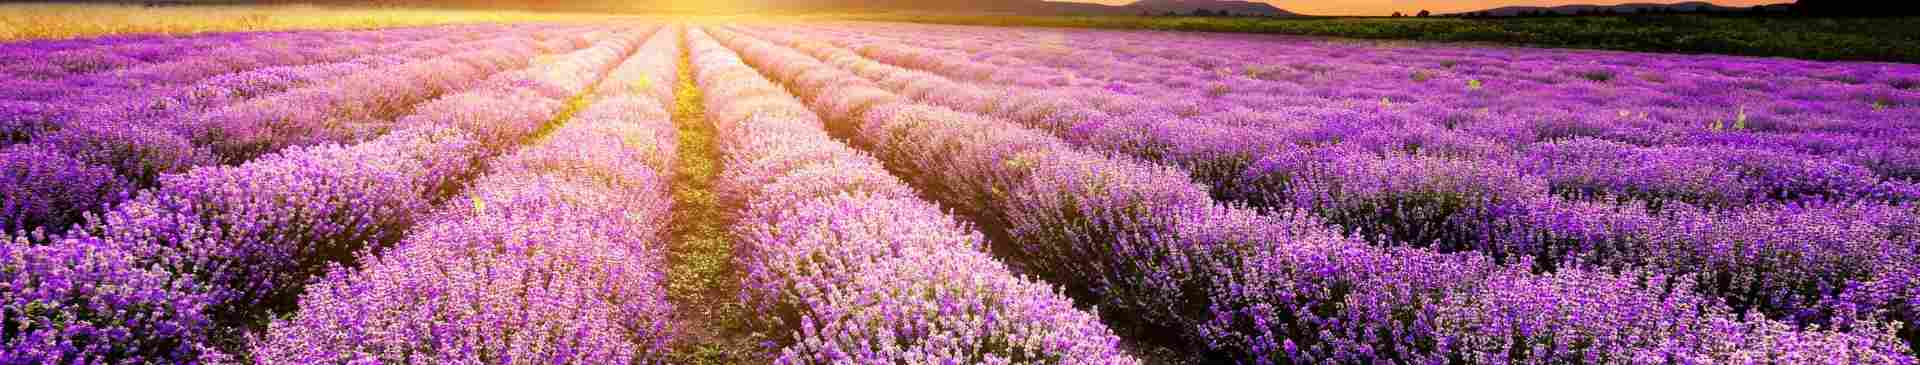 7 Awesome Ways to Use Dried Lavender Bunches  NZ Lavender Farm – Lavender  Backyard Garden®